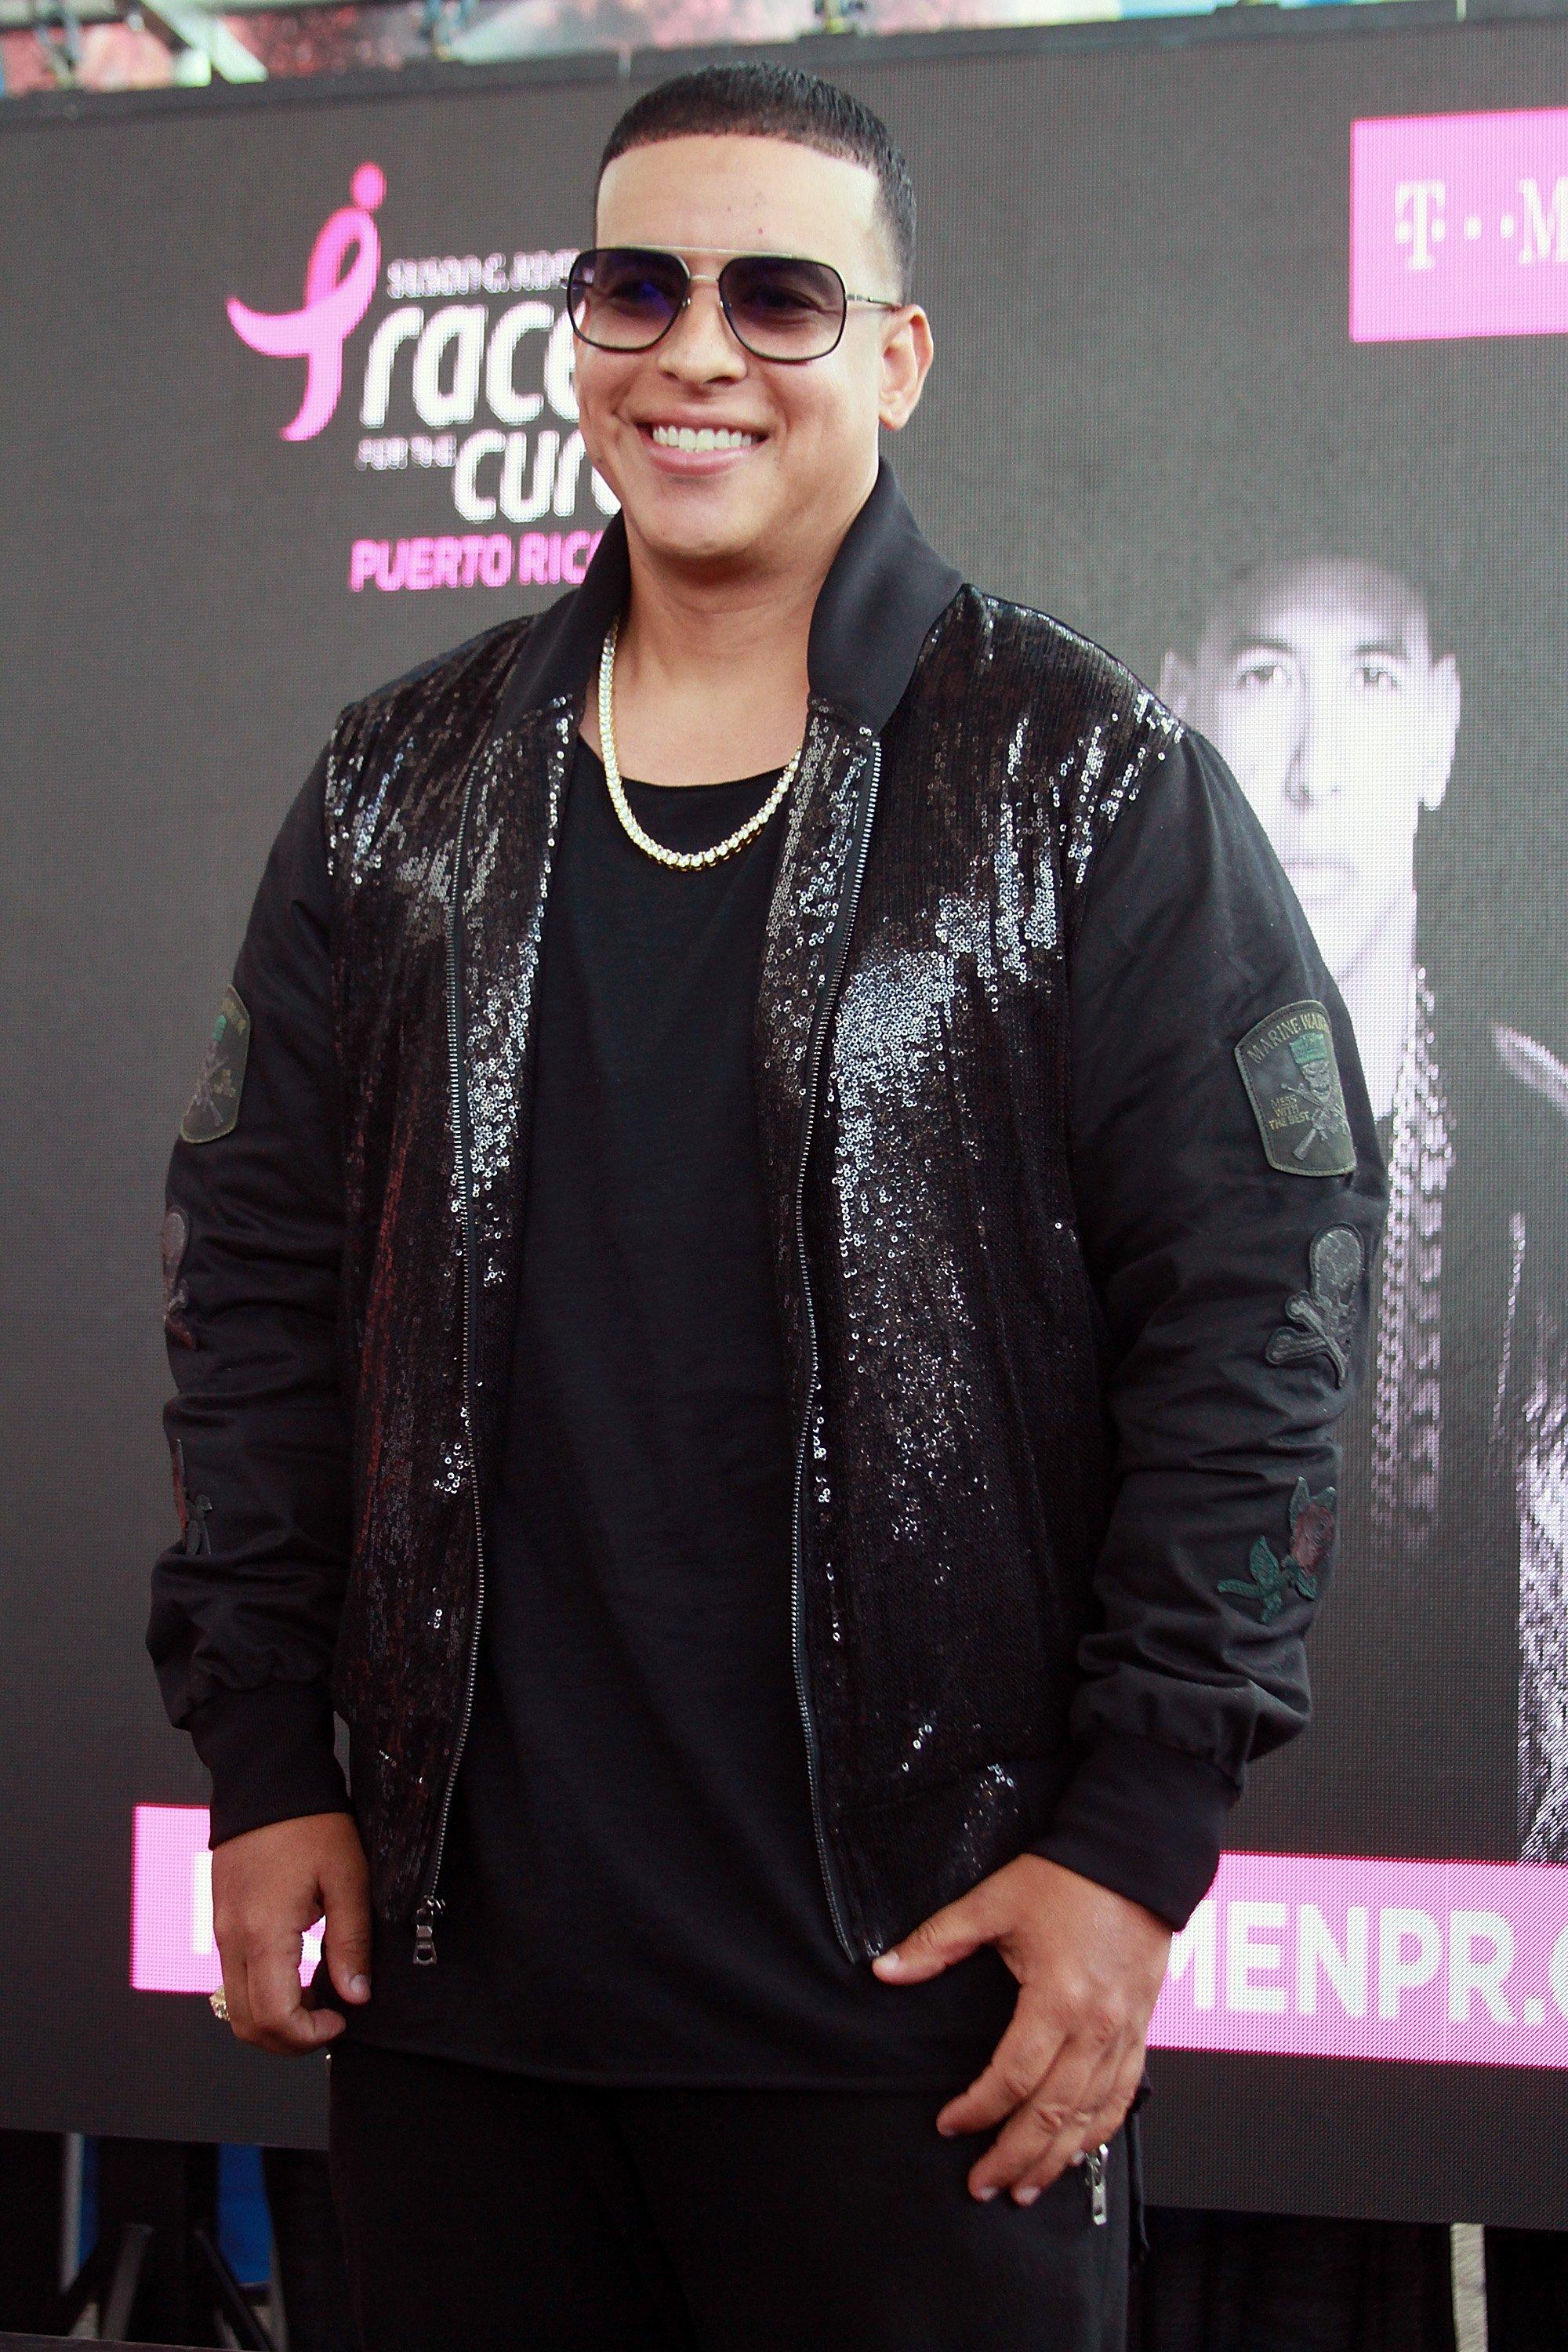 Daddy Yankee photographed in 2017